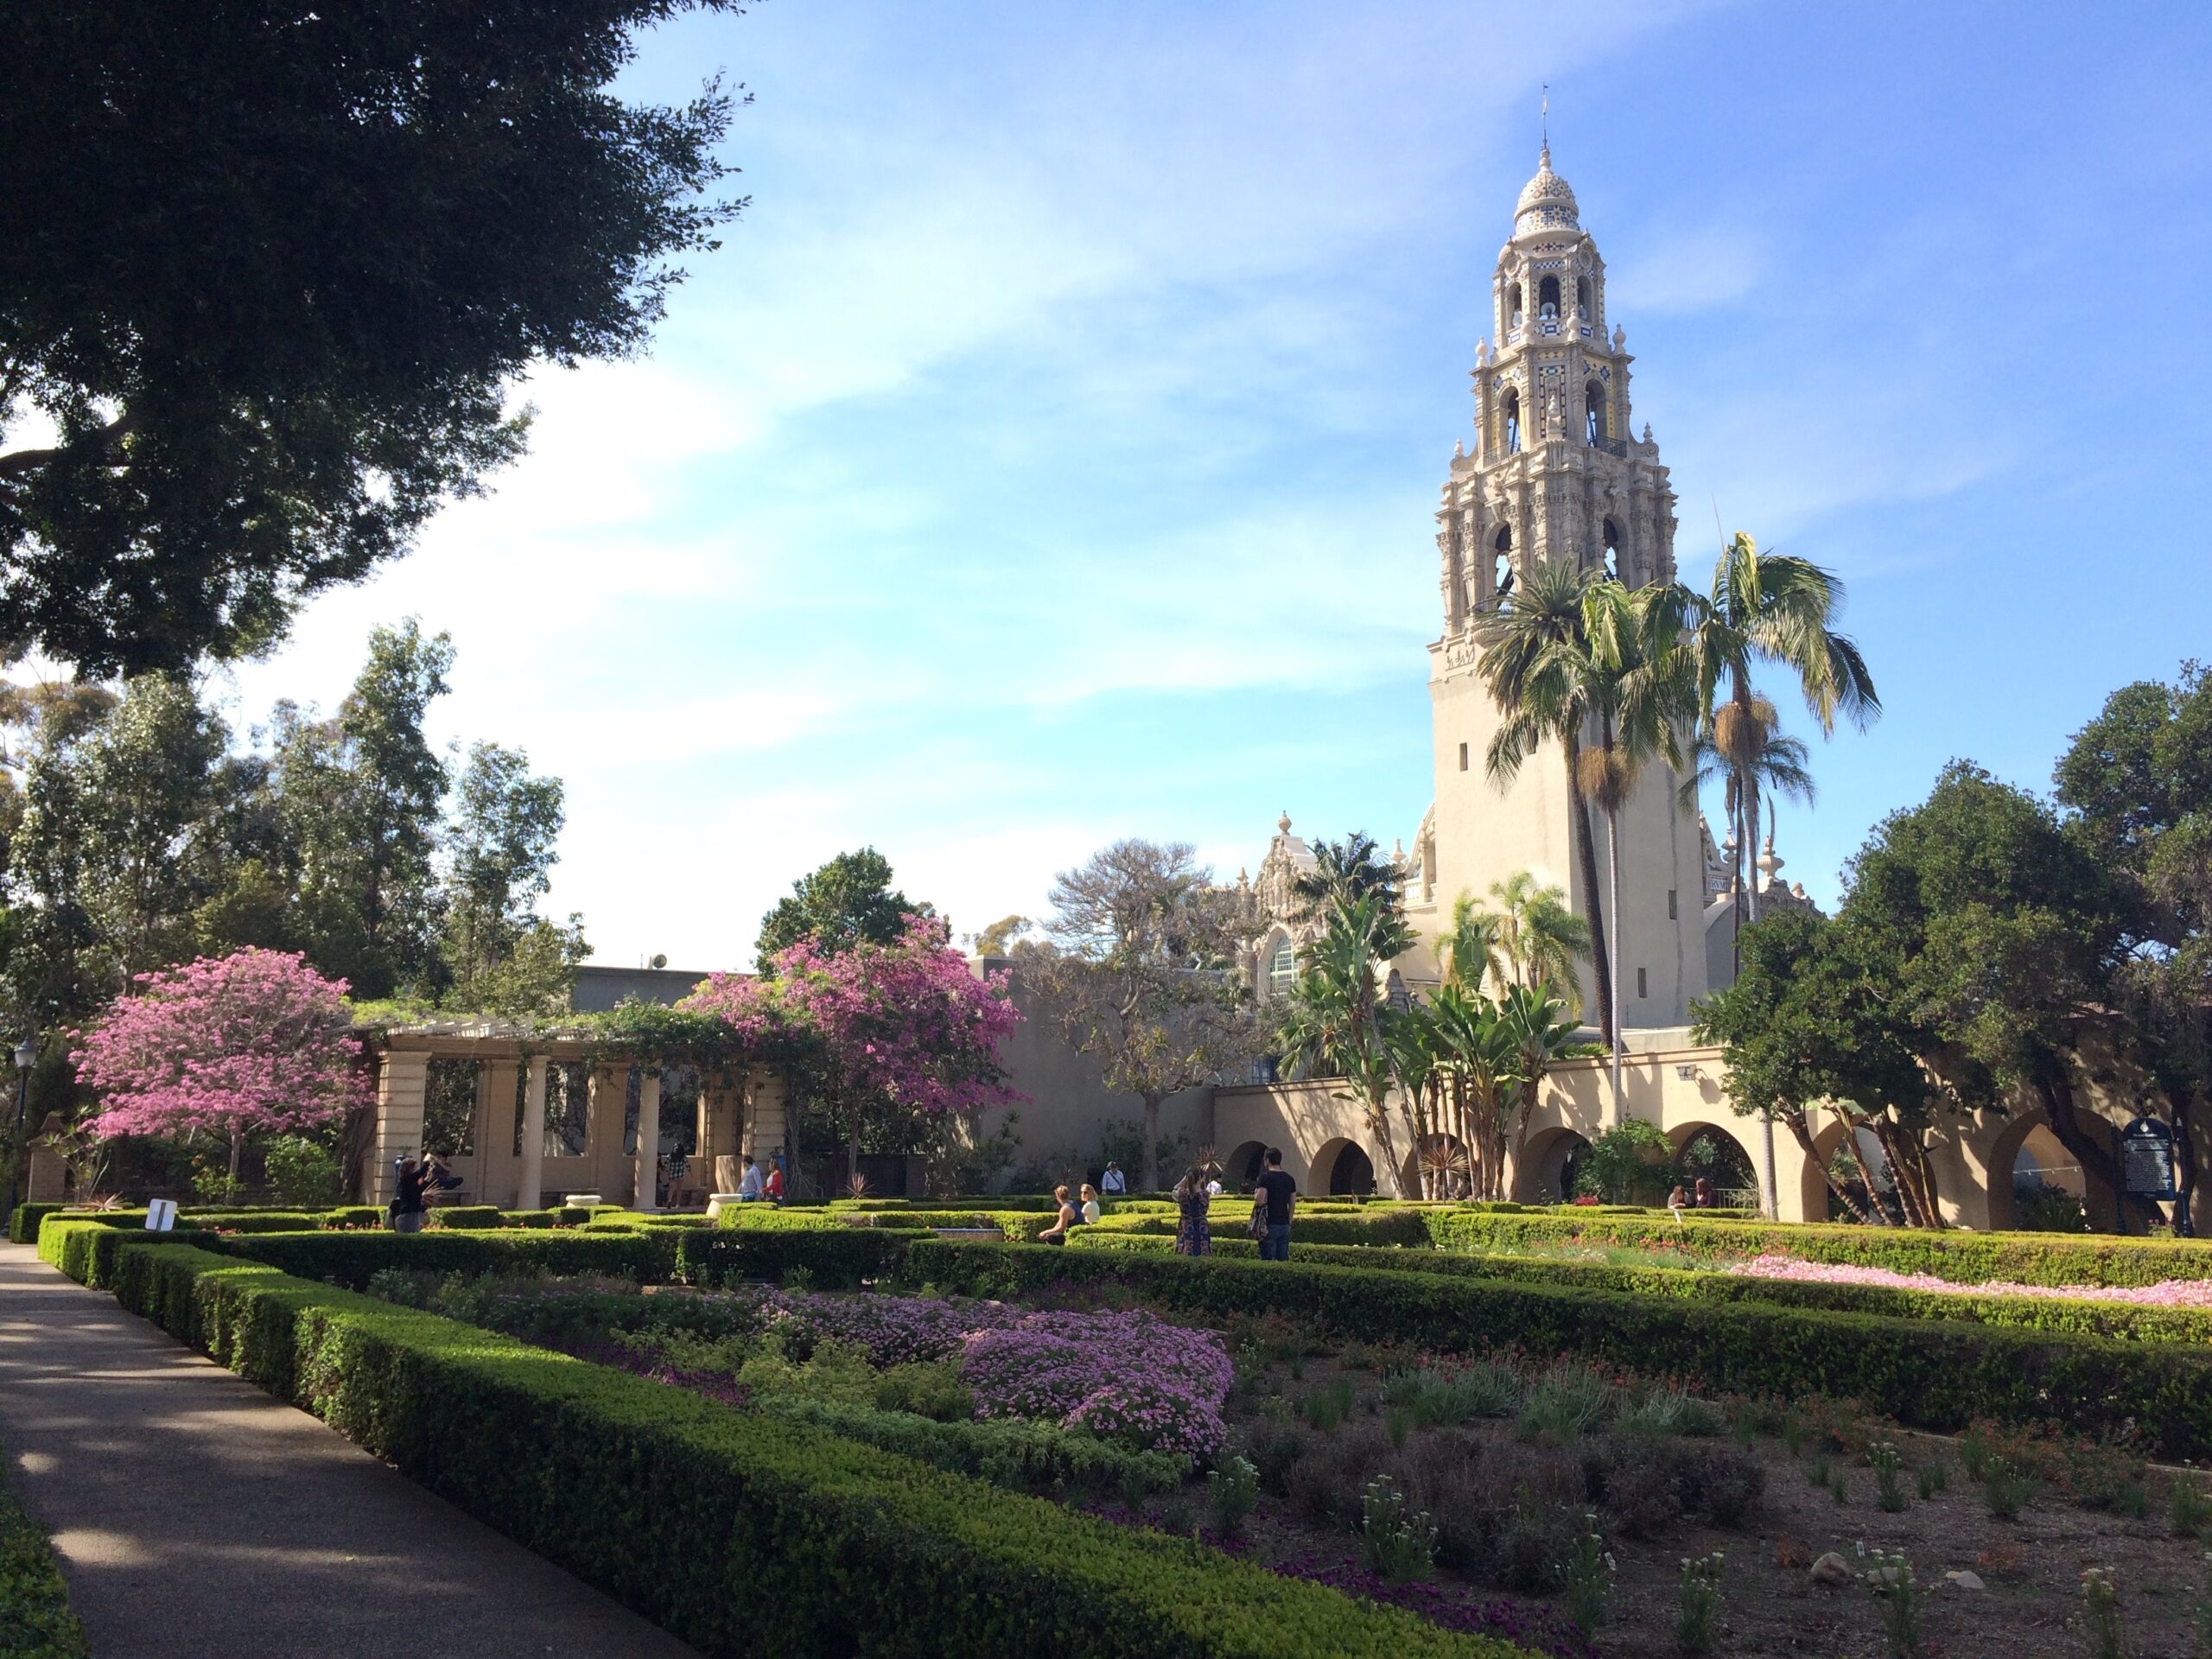 Balboa Park, pictured here, is one of many attractions near University Heights.